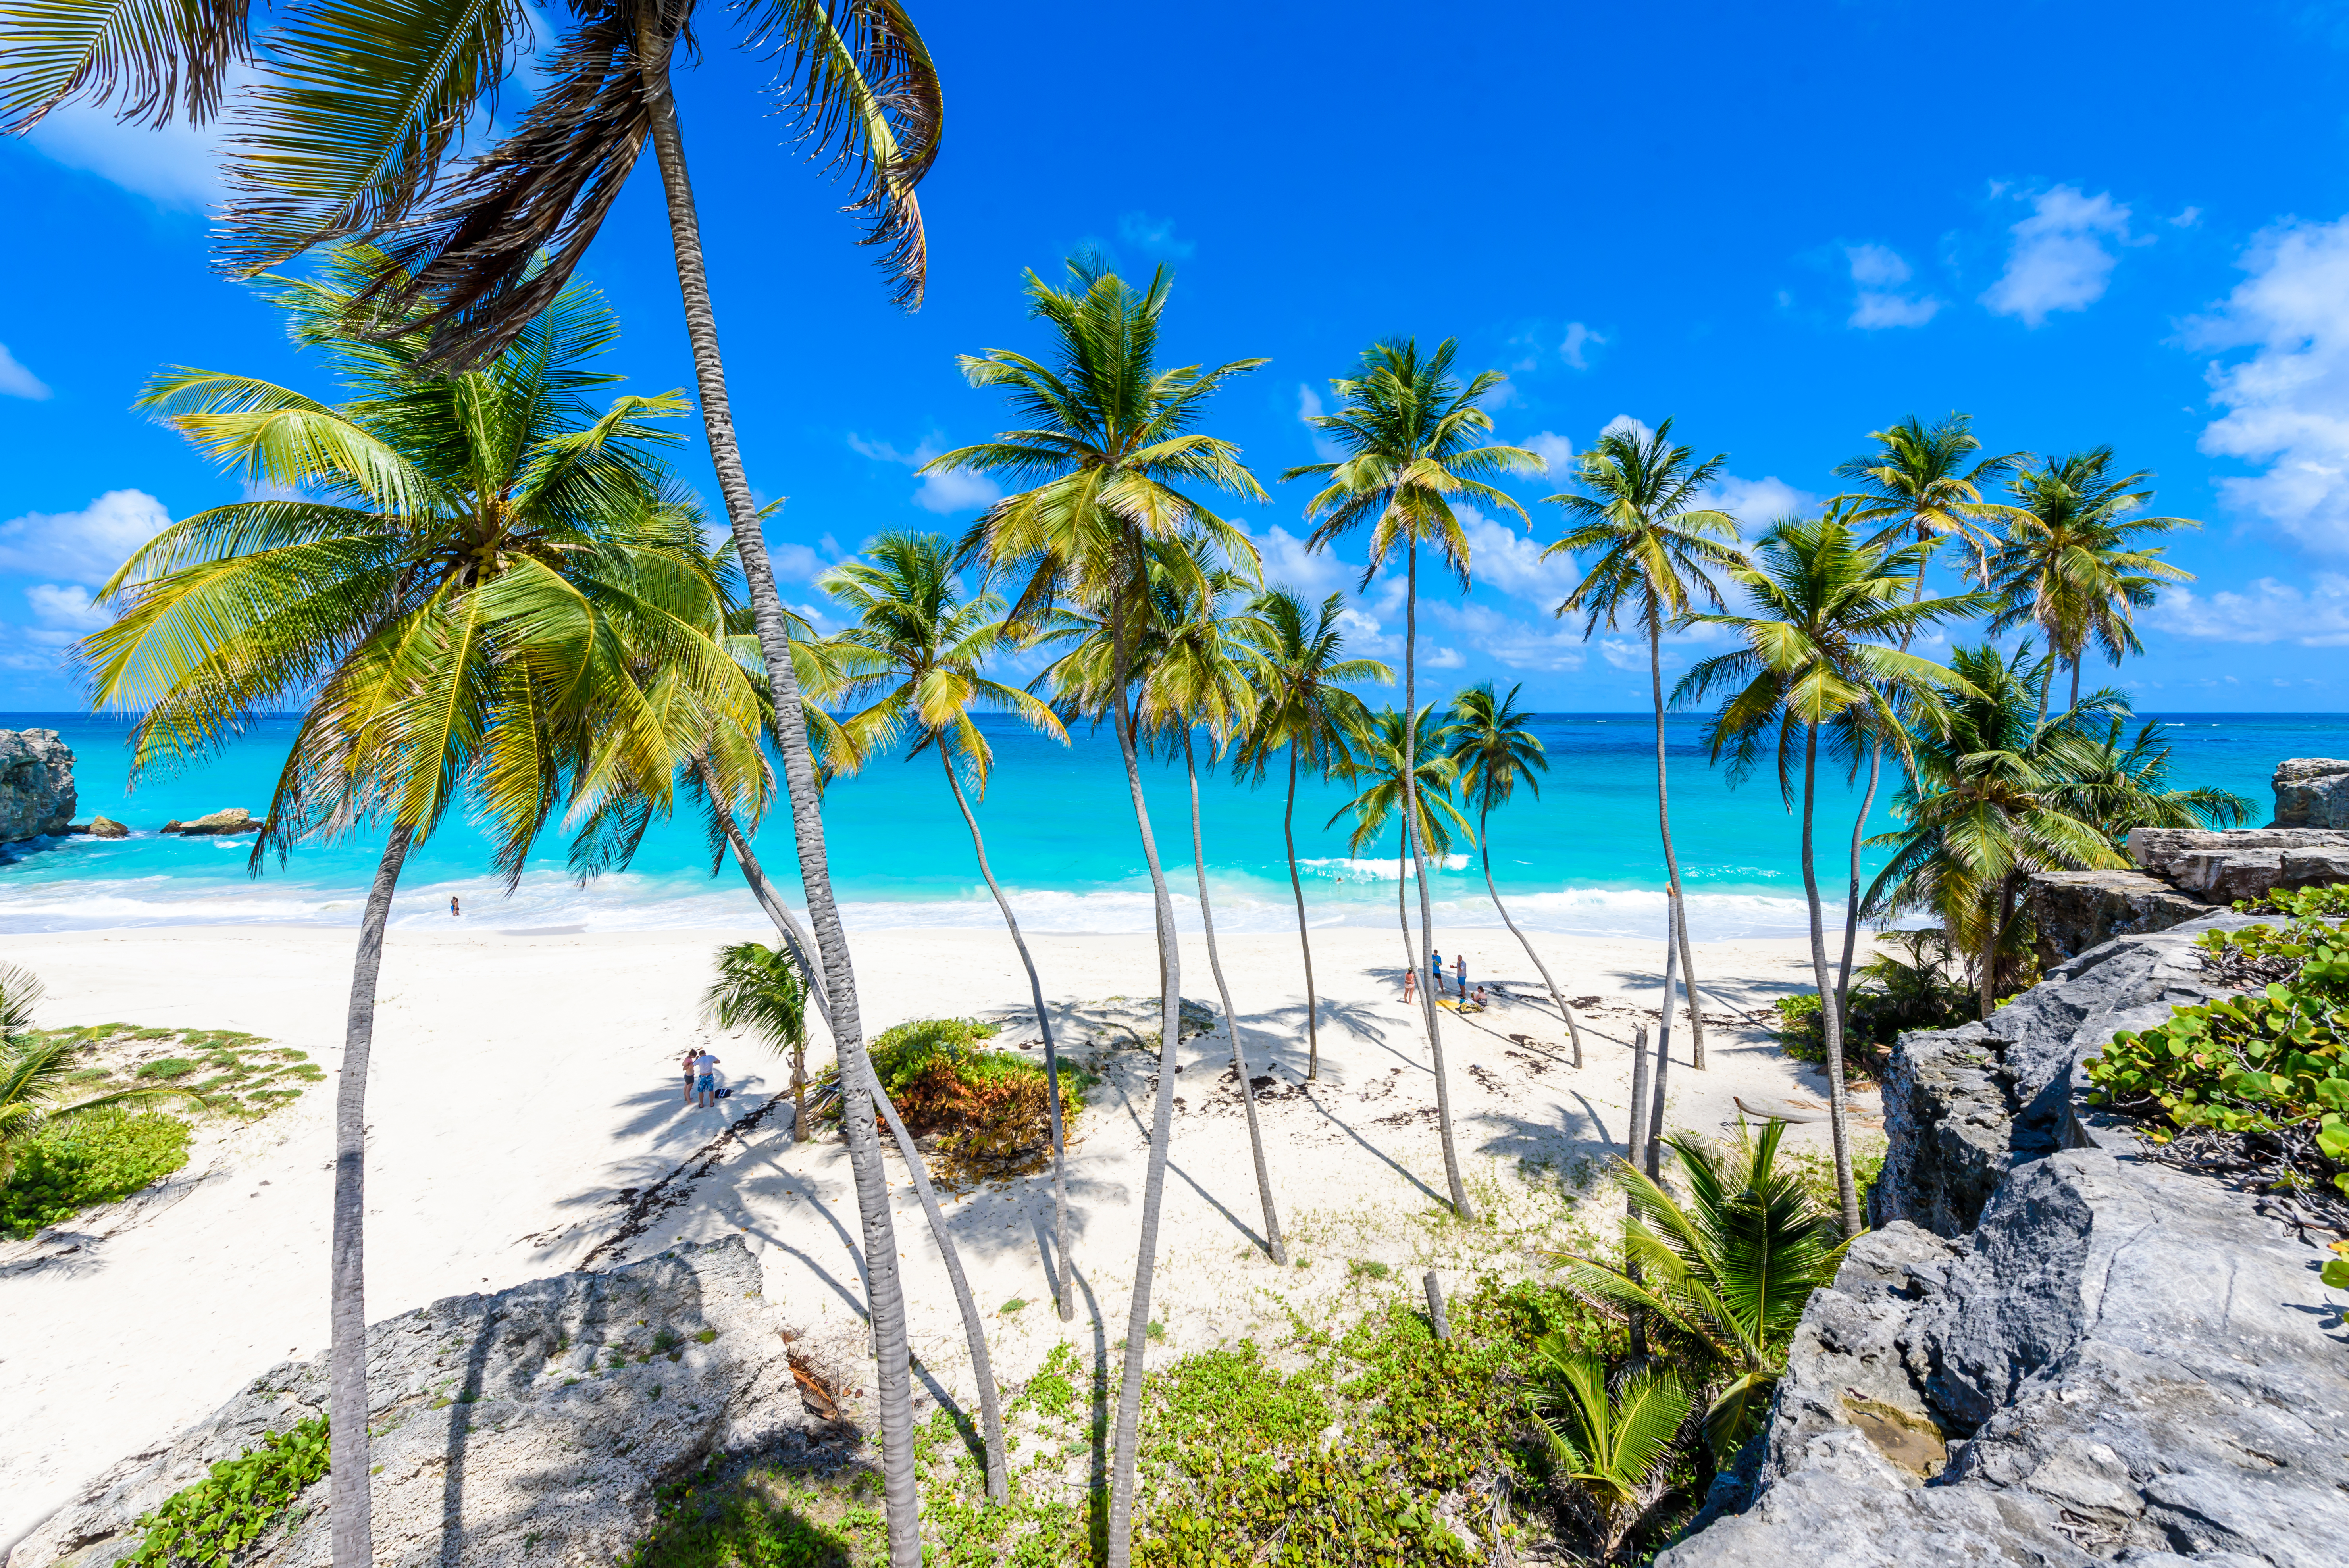 Tropical Destinations Perfect for Holiday Vacations with Family - Paradise Beach in Barbados